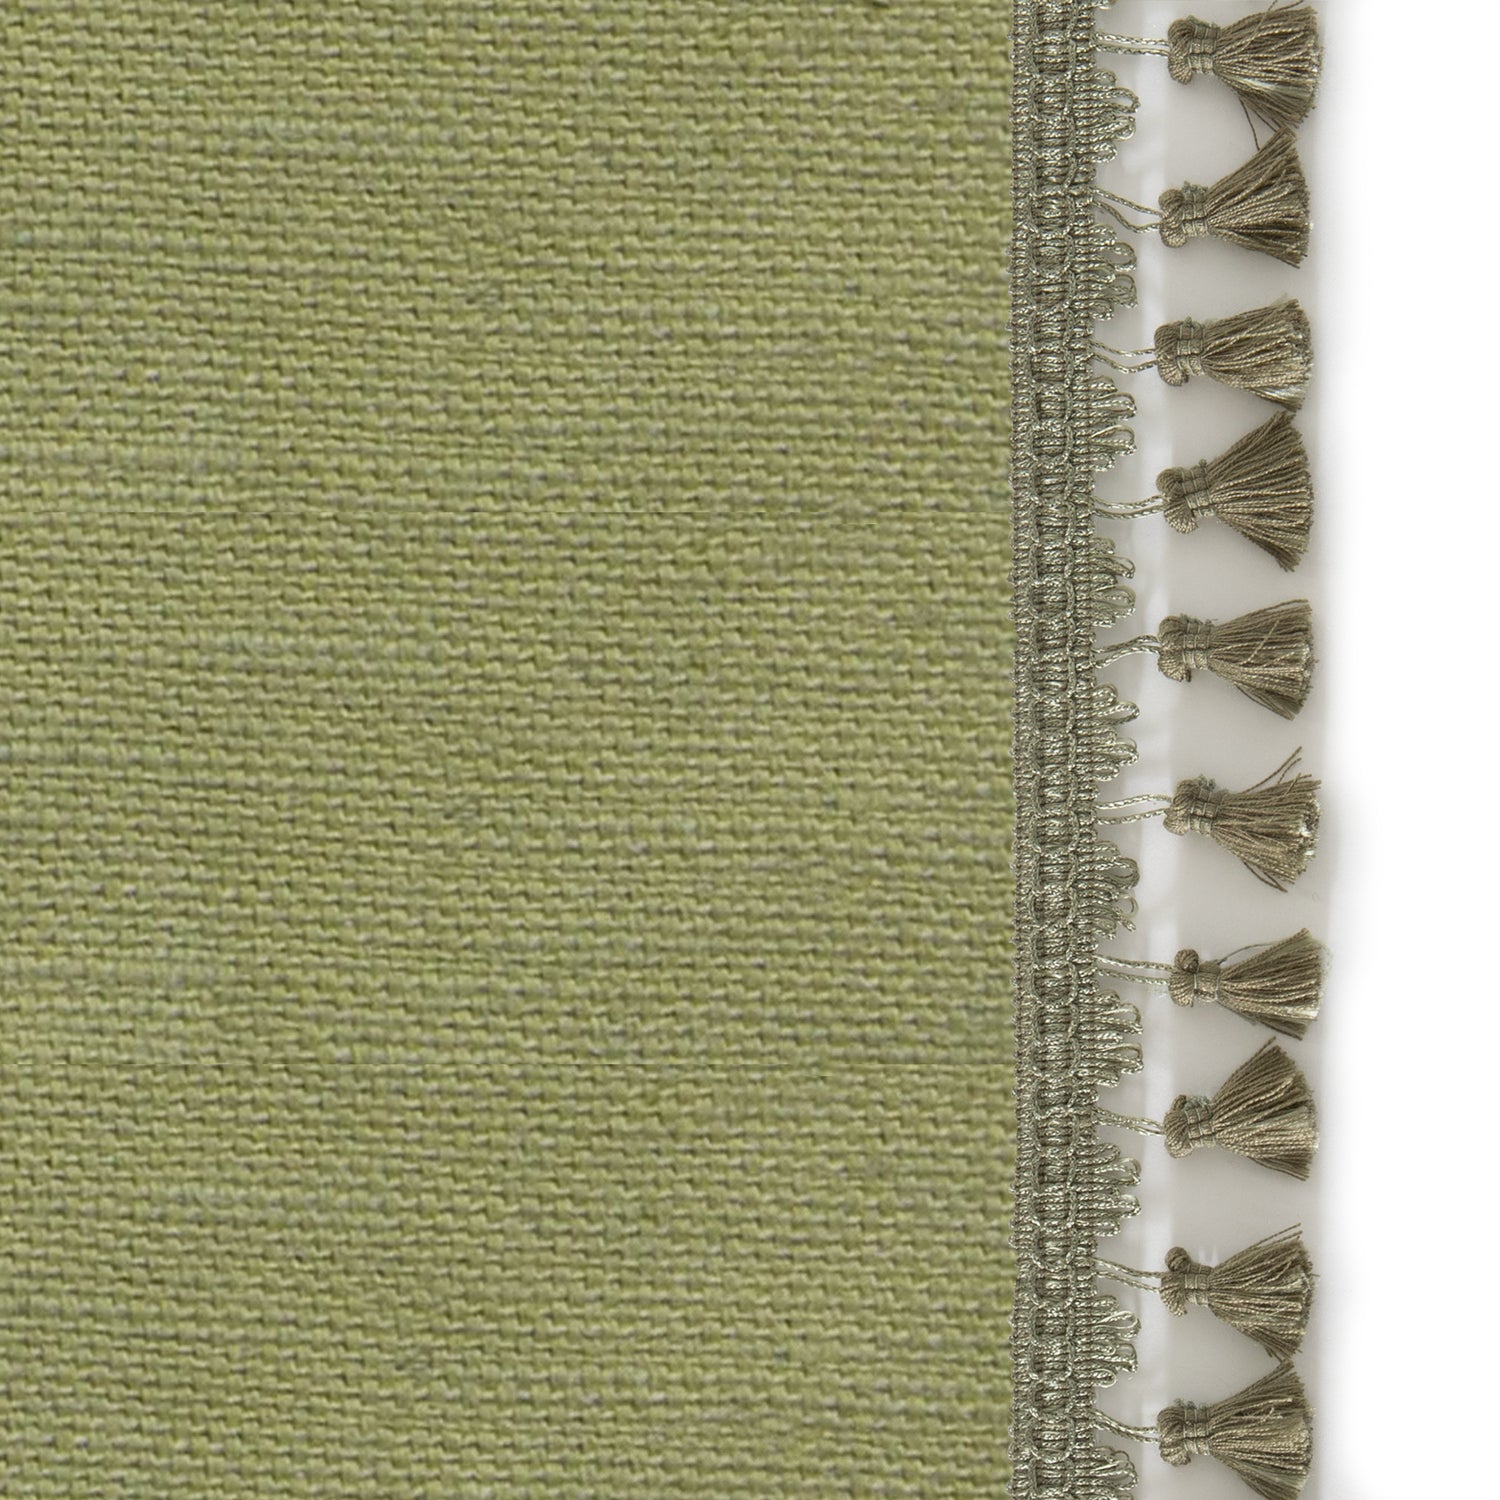 Upclose picture of Moss custom Moss Green Linencurtain with sage tassel trim